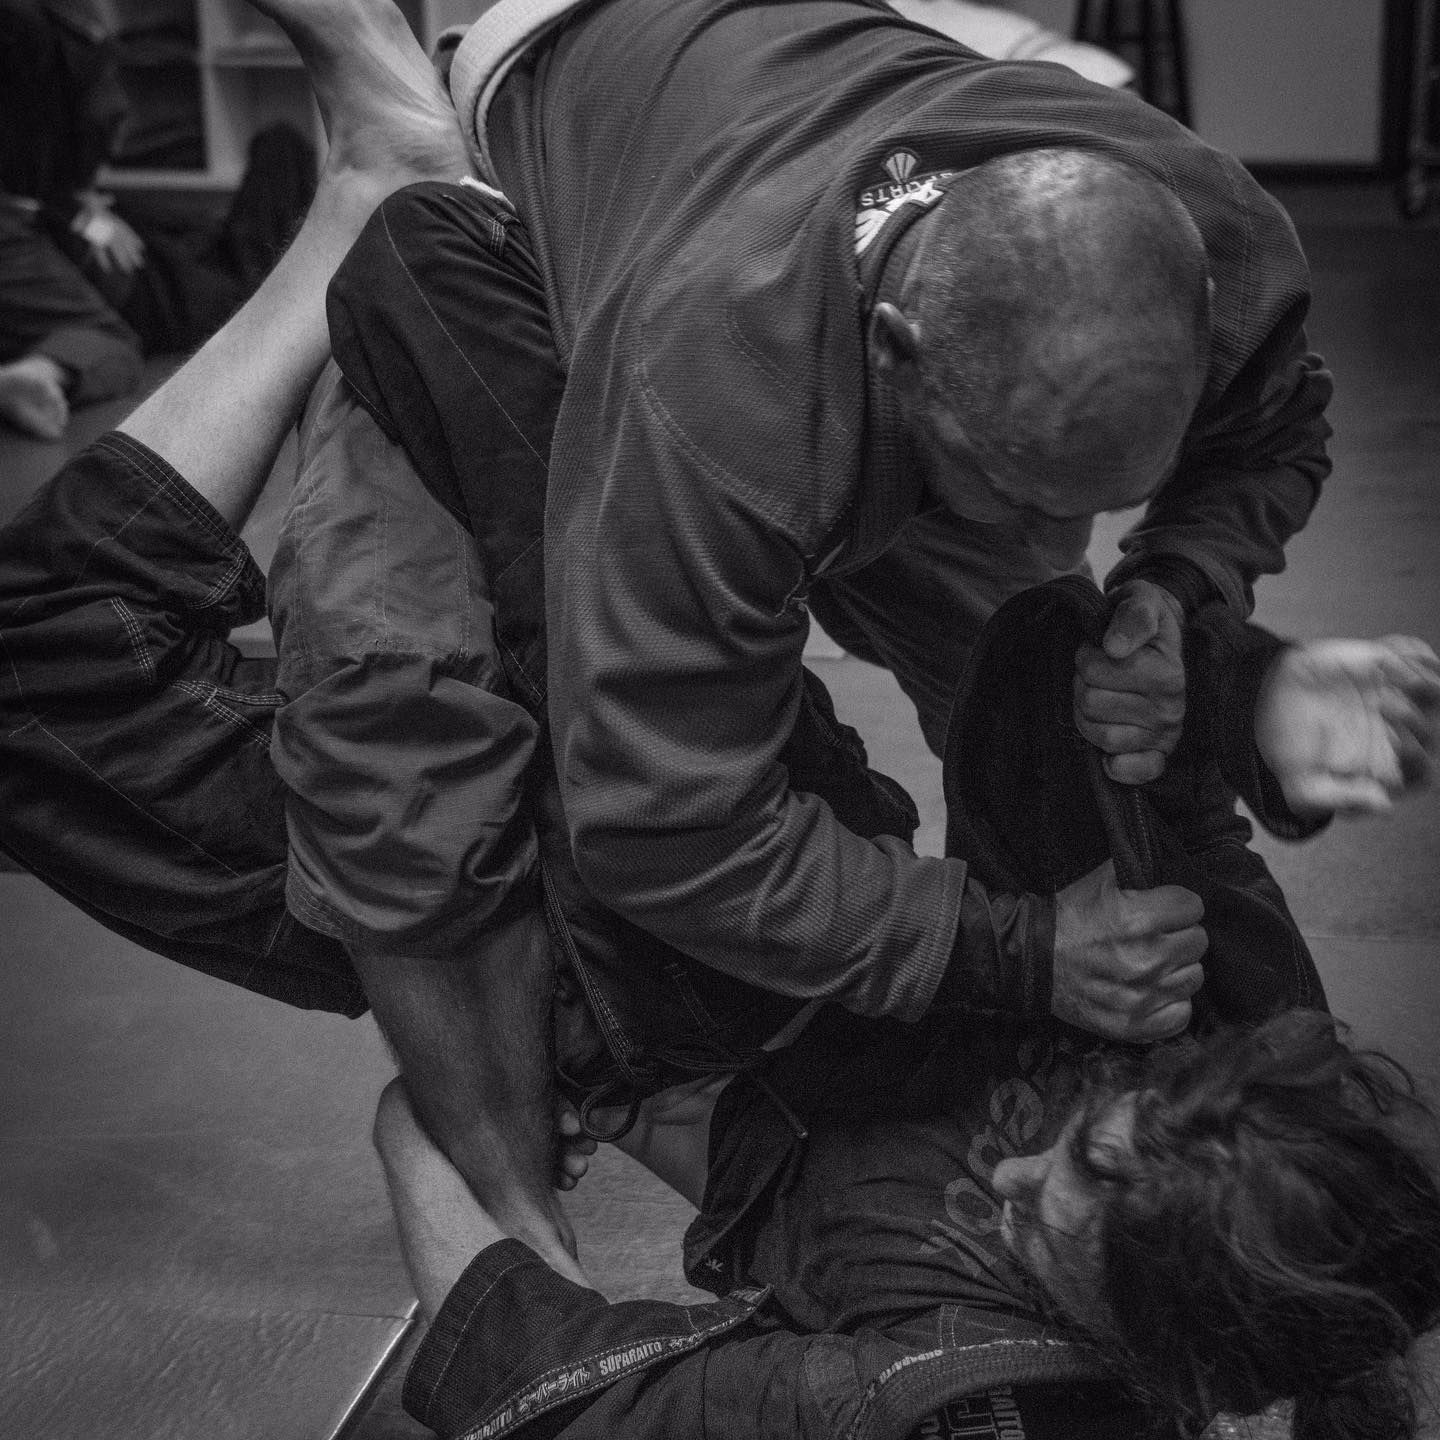 a black and white photo of two men wrestling with one wearing a shirt that says jiu-jitsu